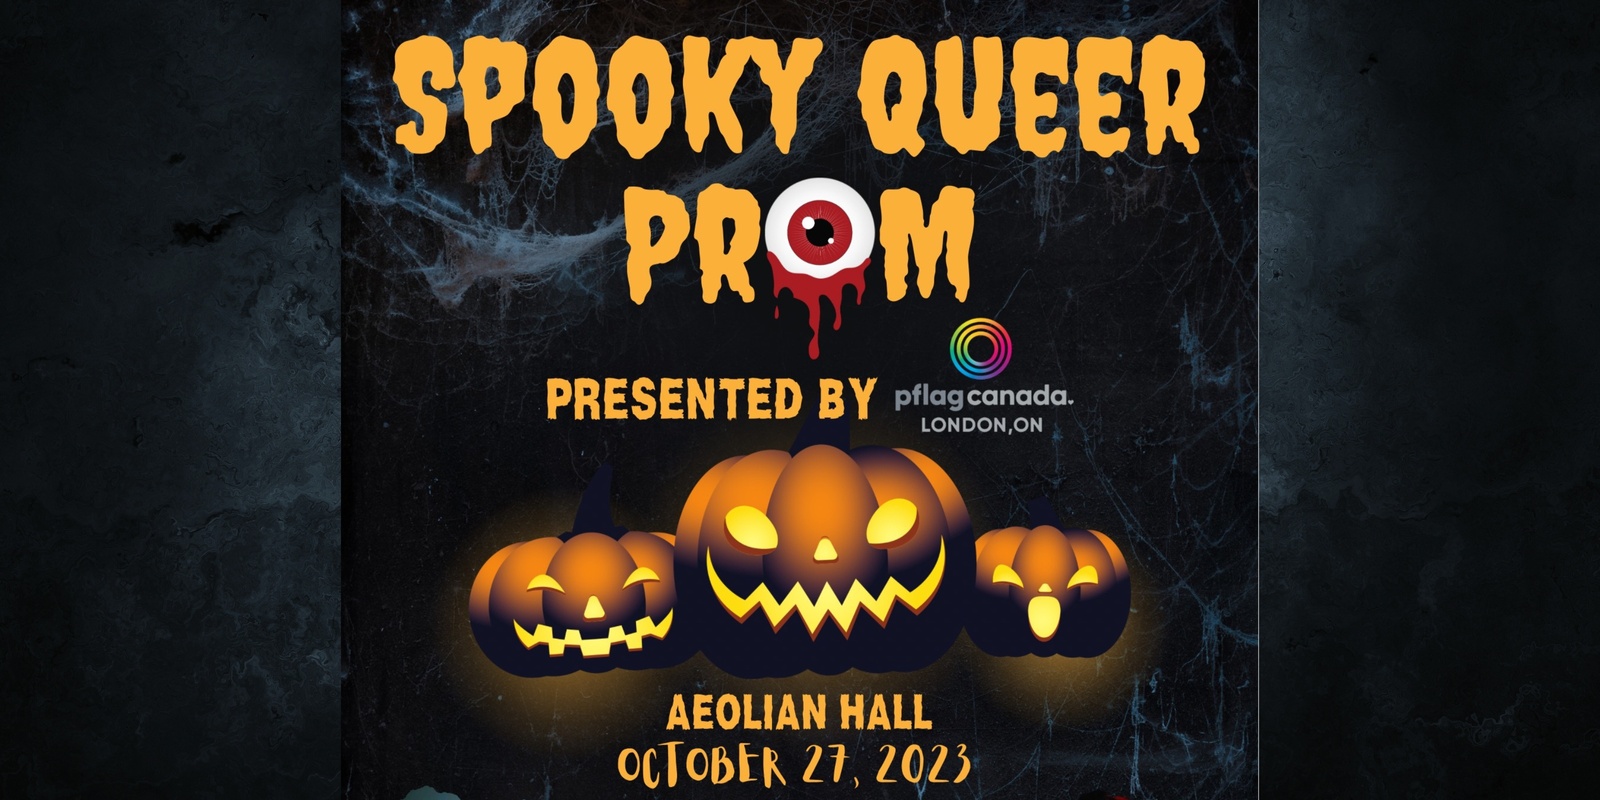 Banner image for Spooky Queer Prom (Sr. Prom - 19+)